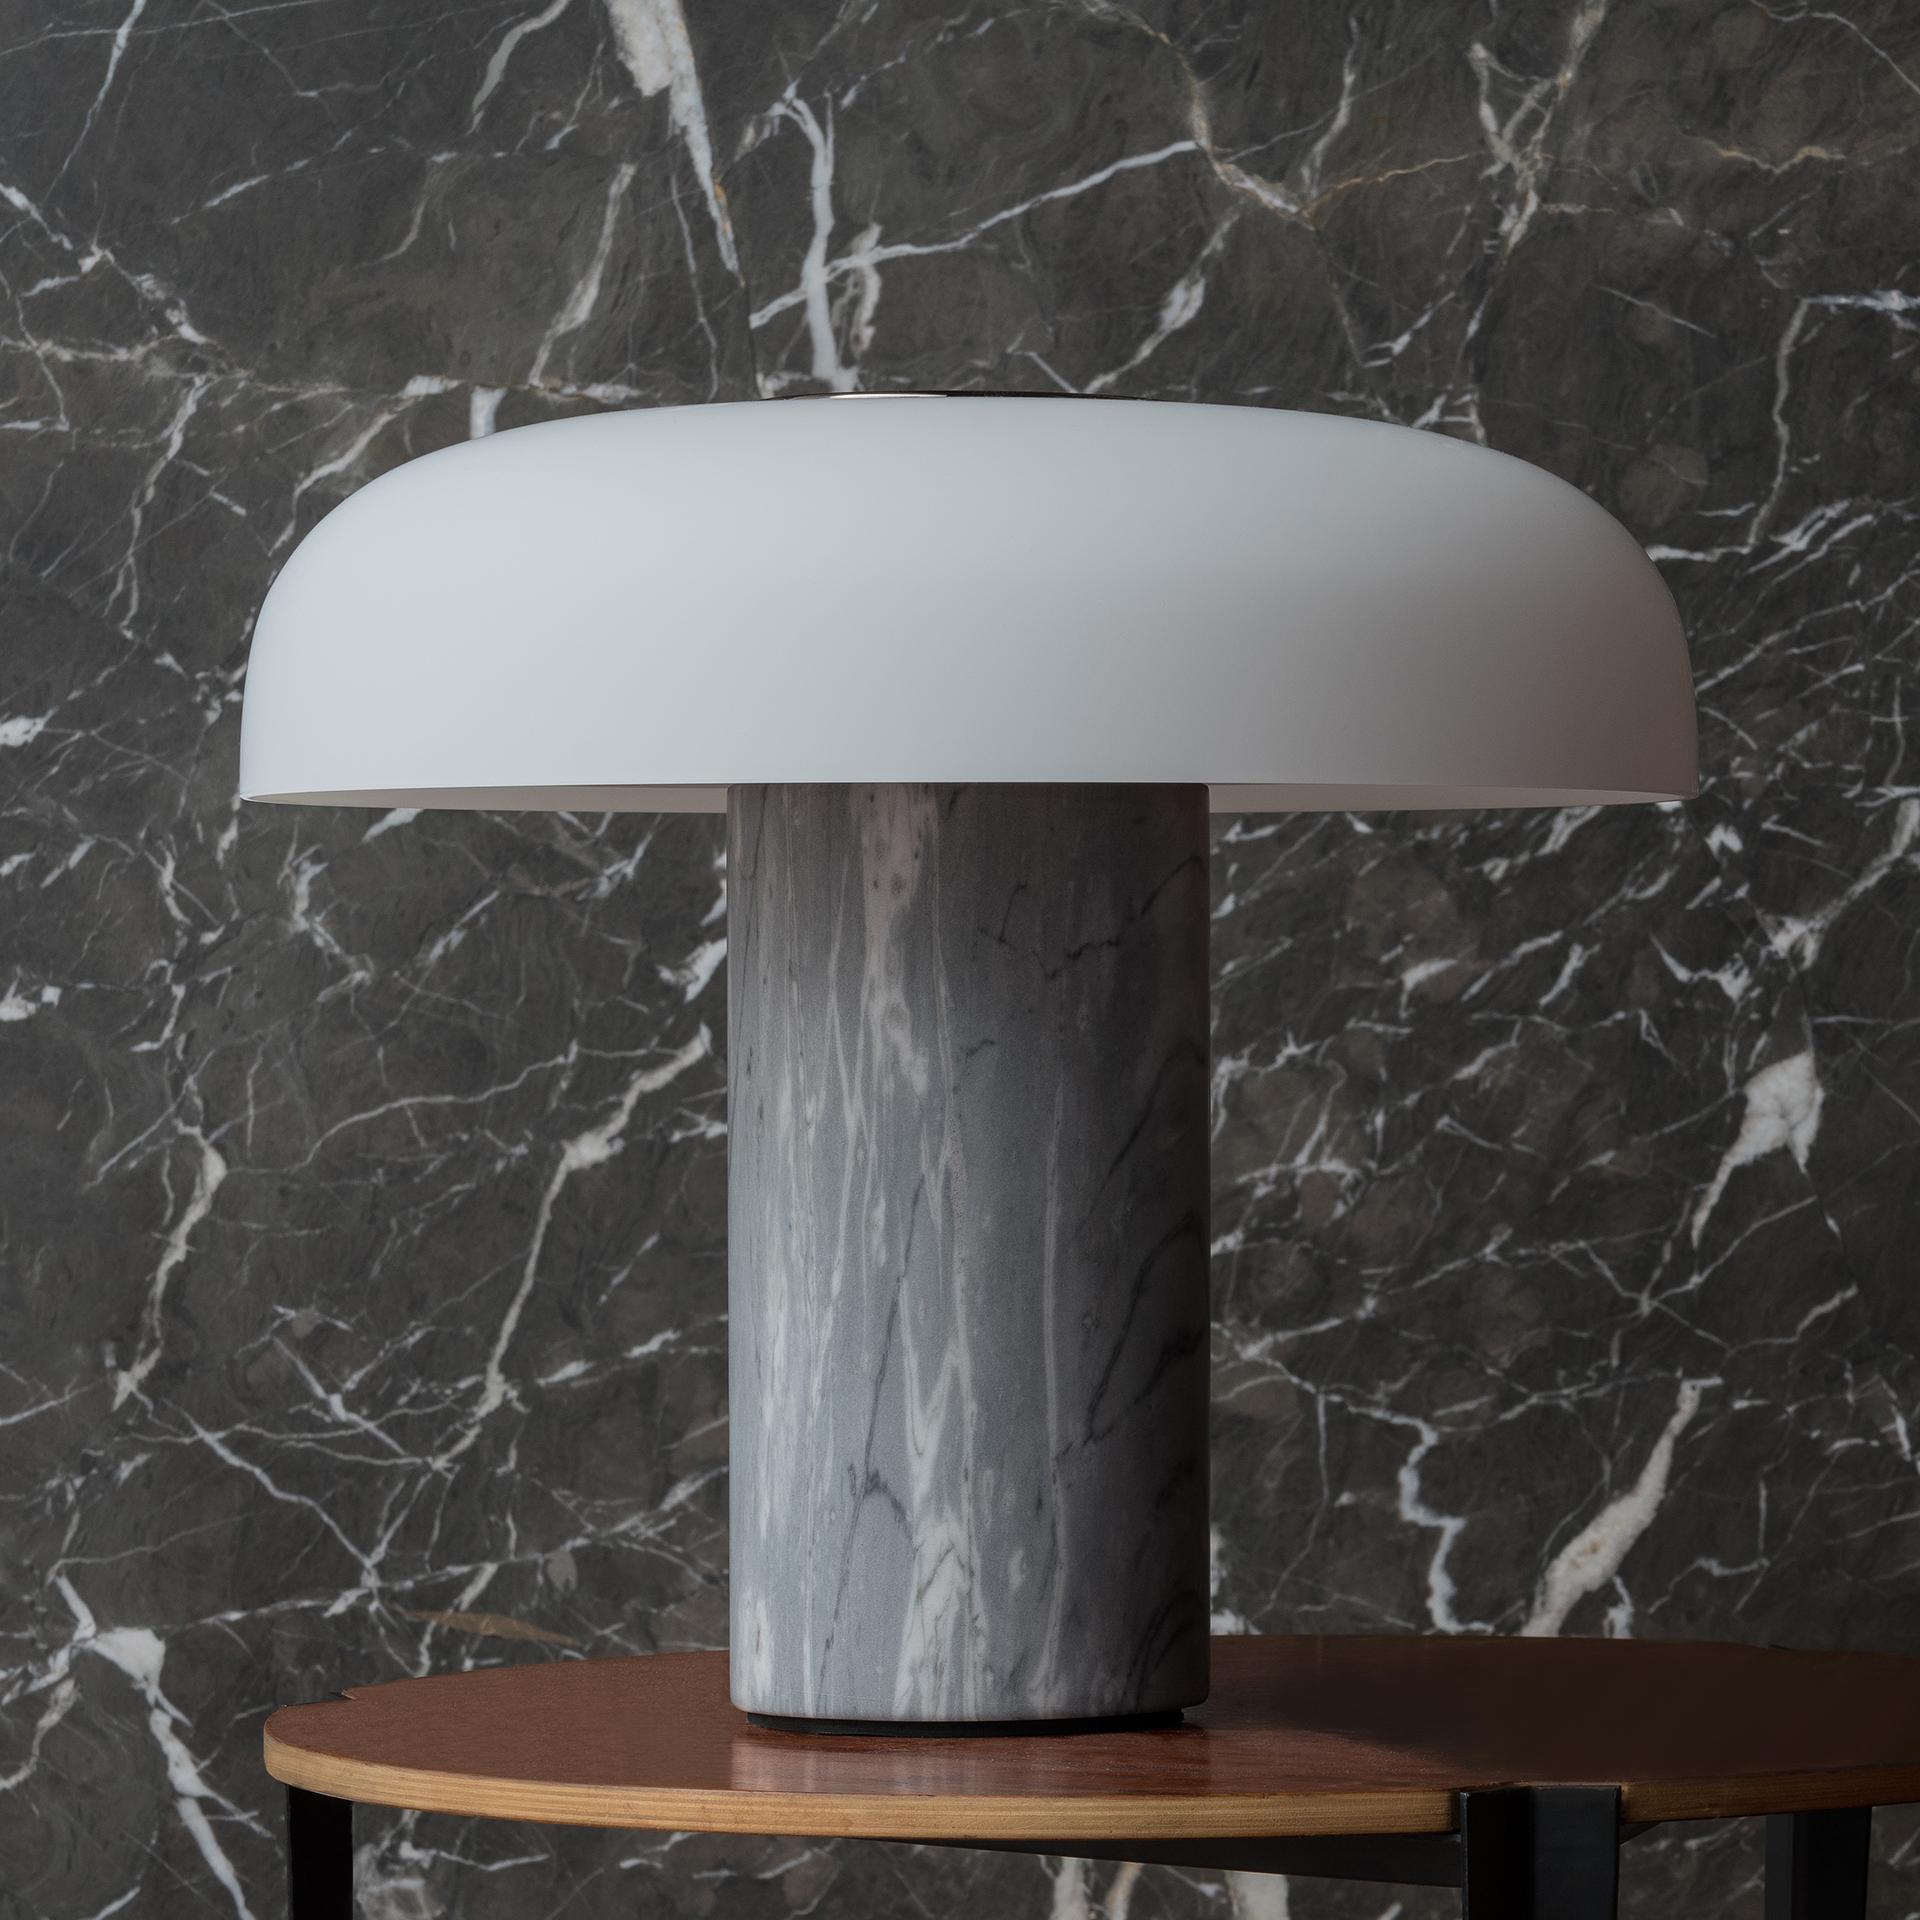 Studio Buratti 'Tropico' gray marble & glass table lamp for Fontana Arte. 

Executed in high quality marble, thick etched hand blown opaline glass and galvanized glossy black metal. The 